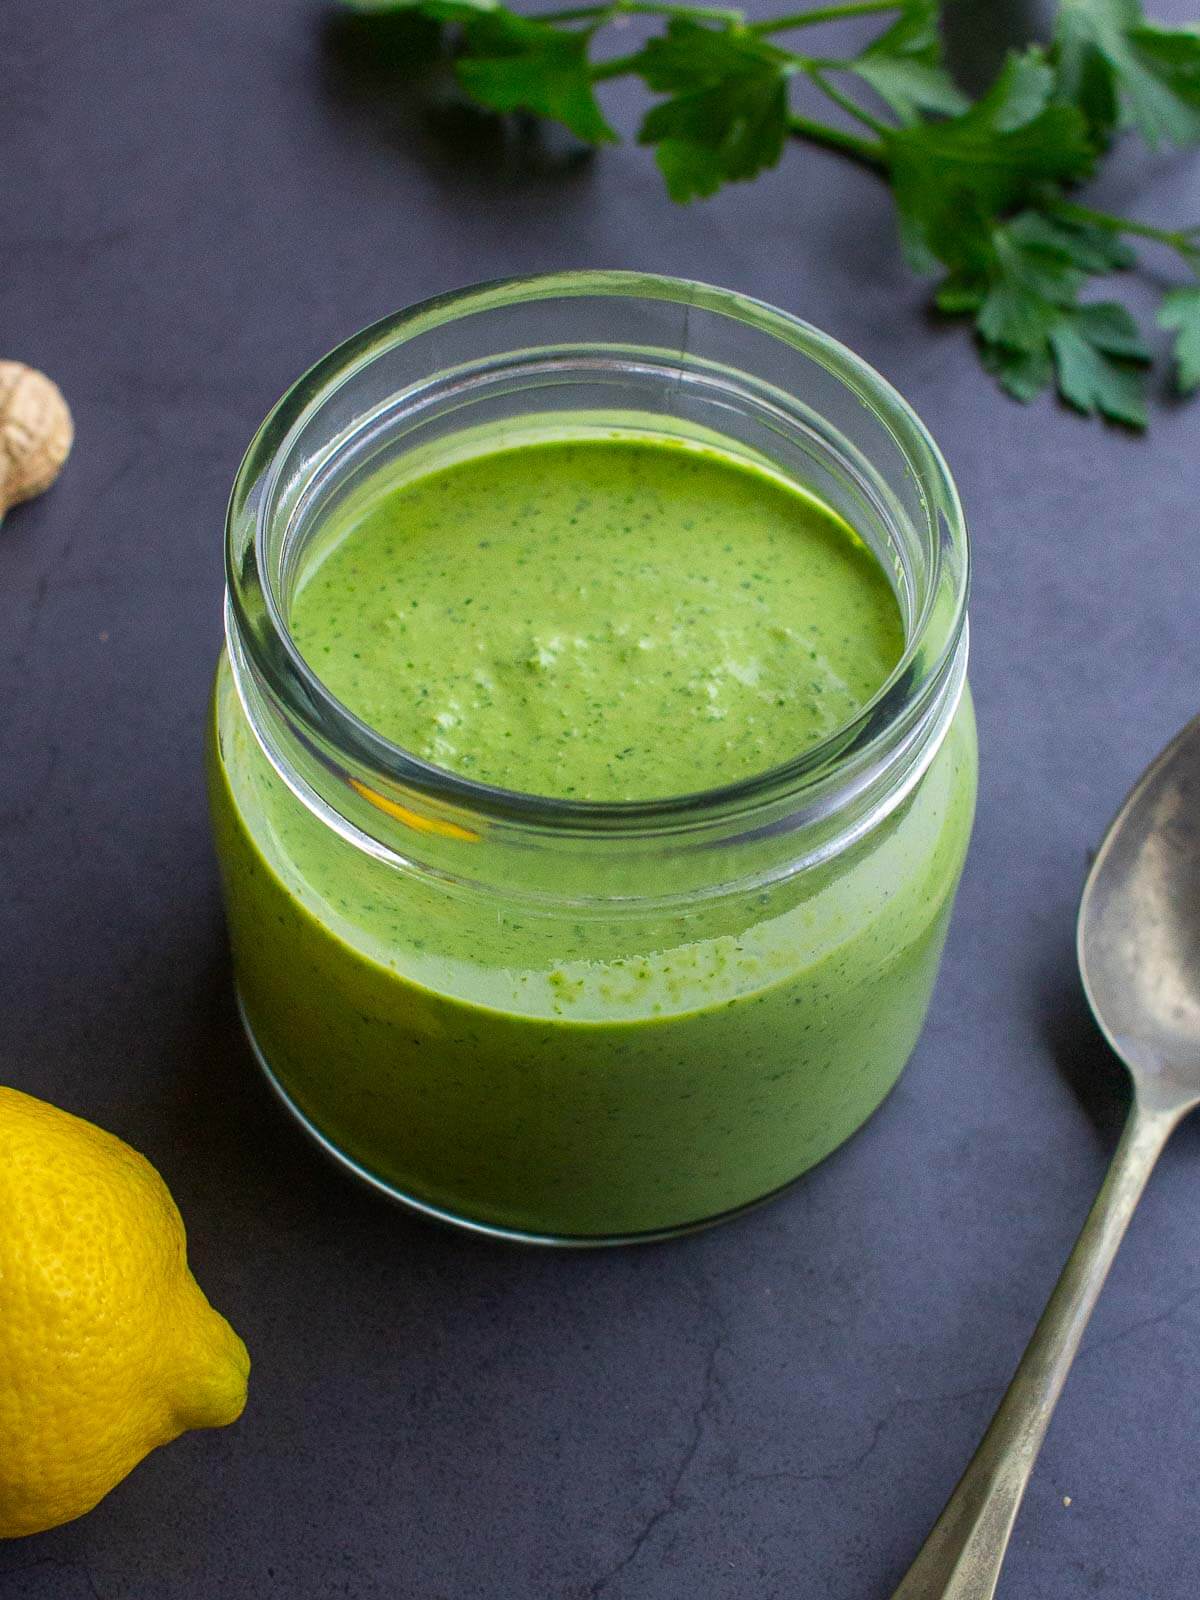 A jar of creamy vegan sauce with lemons and parsley, perfect for dressing salads, tossing with pasta, or using for falafel wraps.